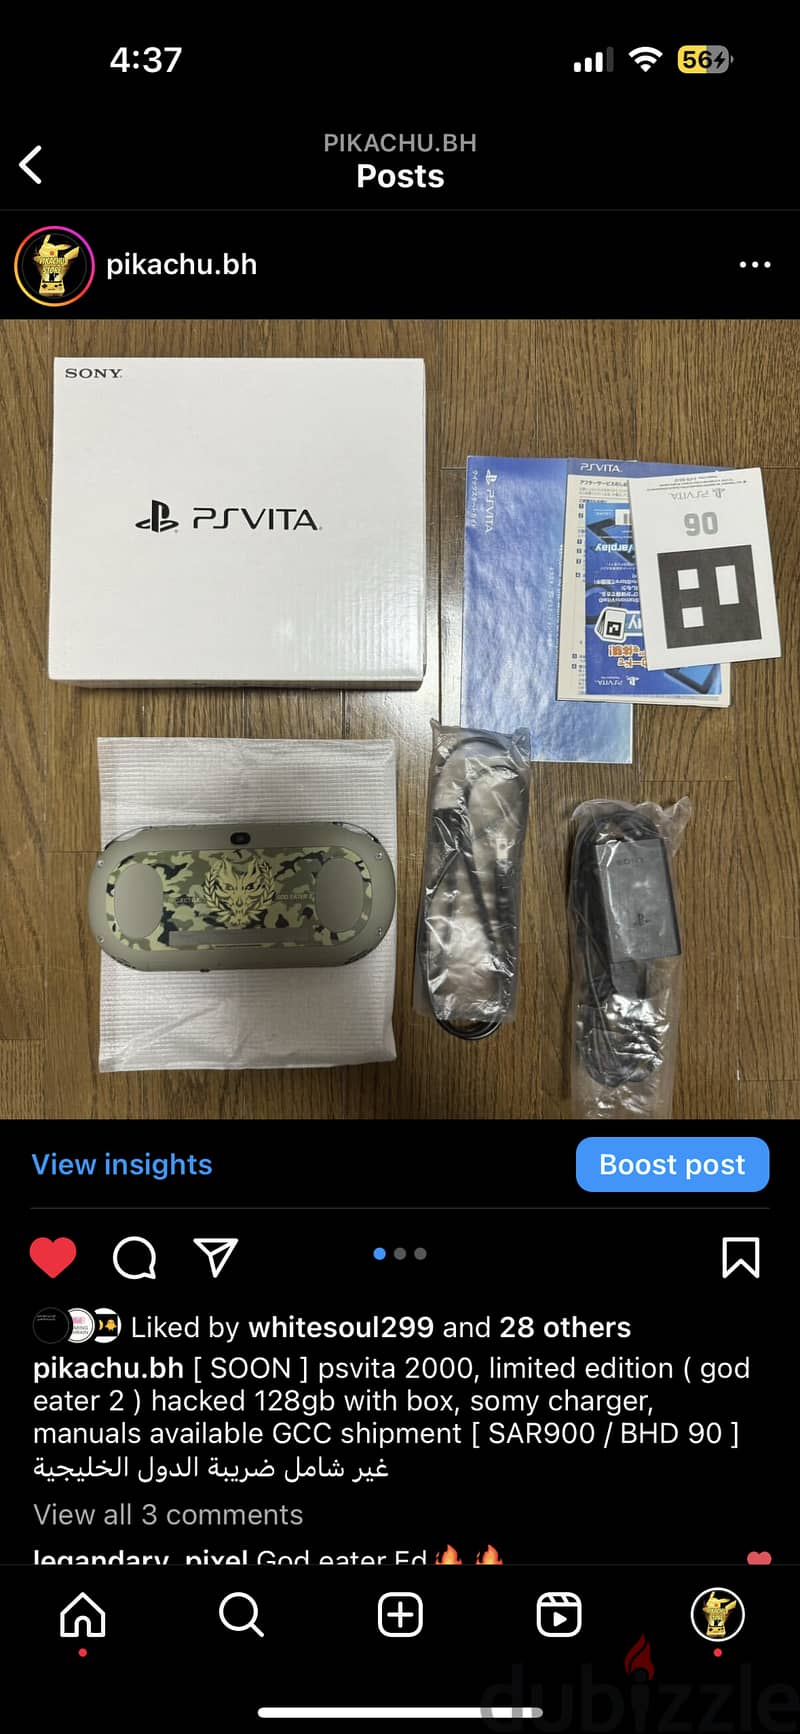 LIMITED EDITION psvita 2000, hacked 128gb with box and original charge 2